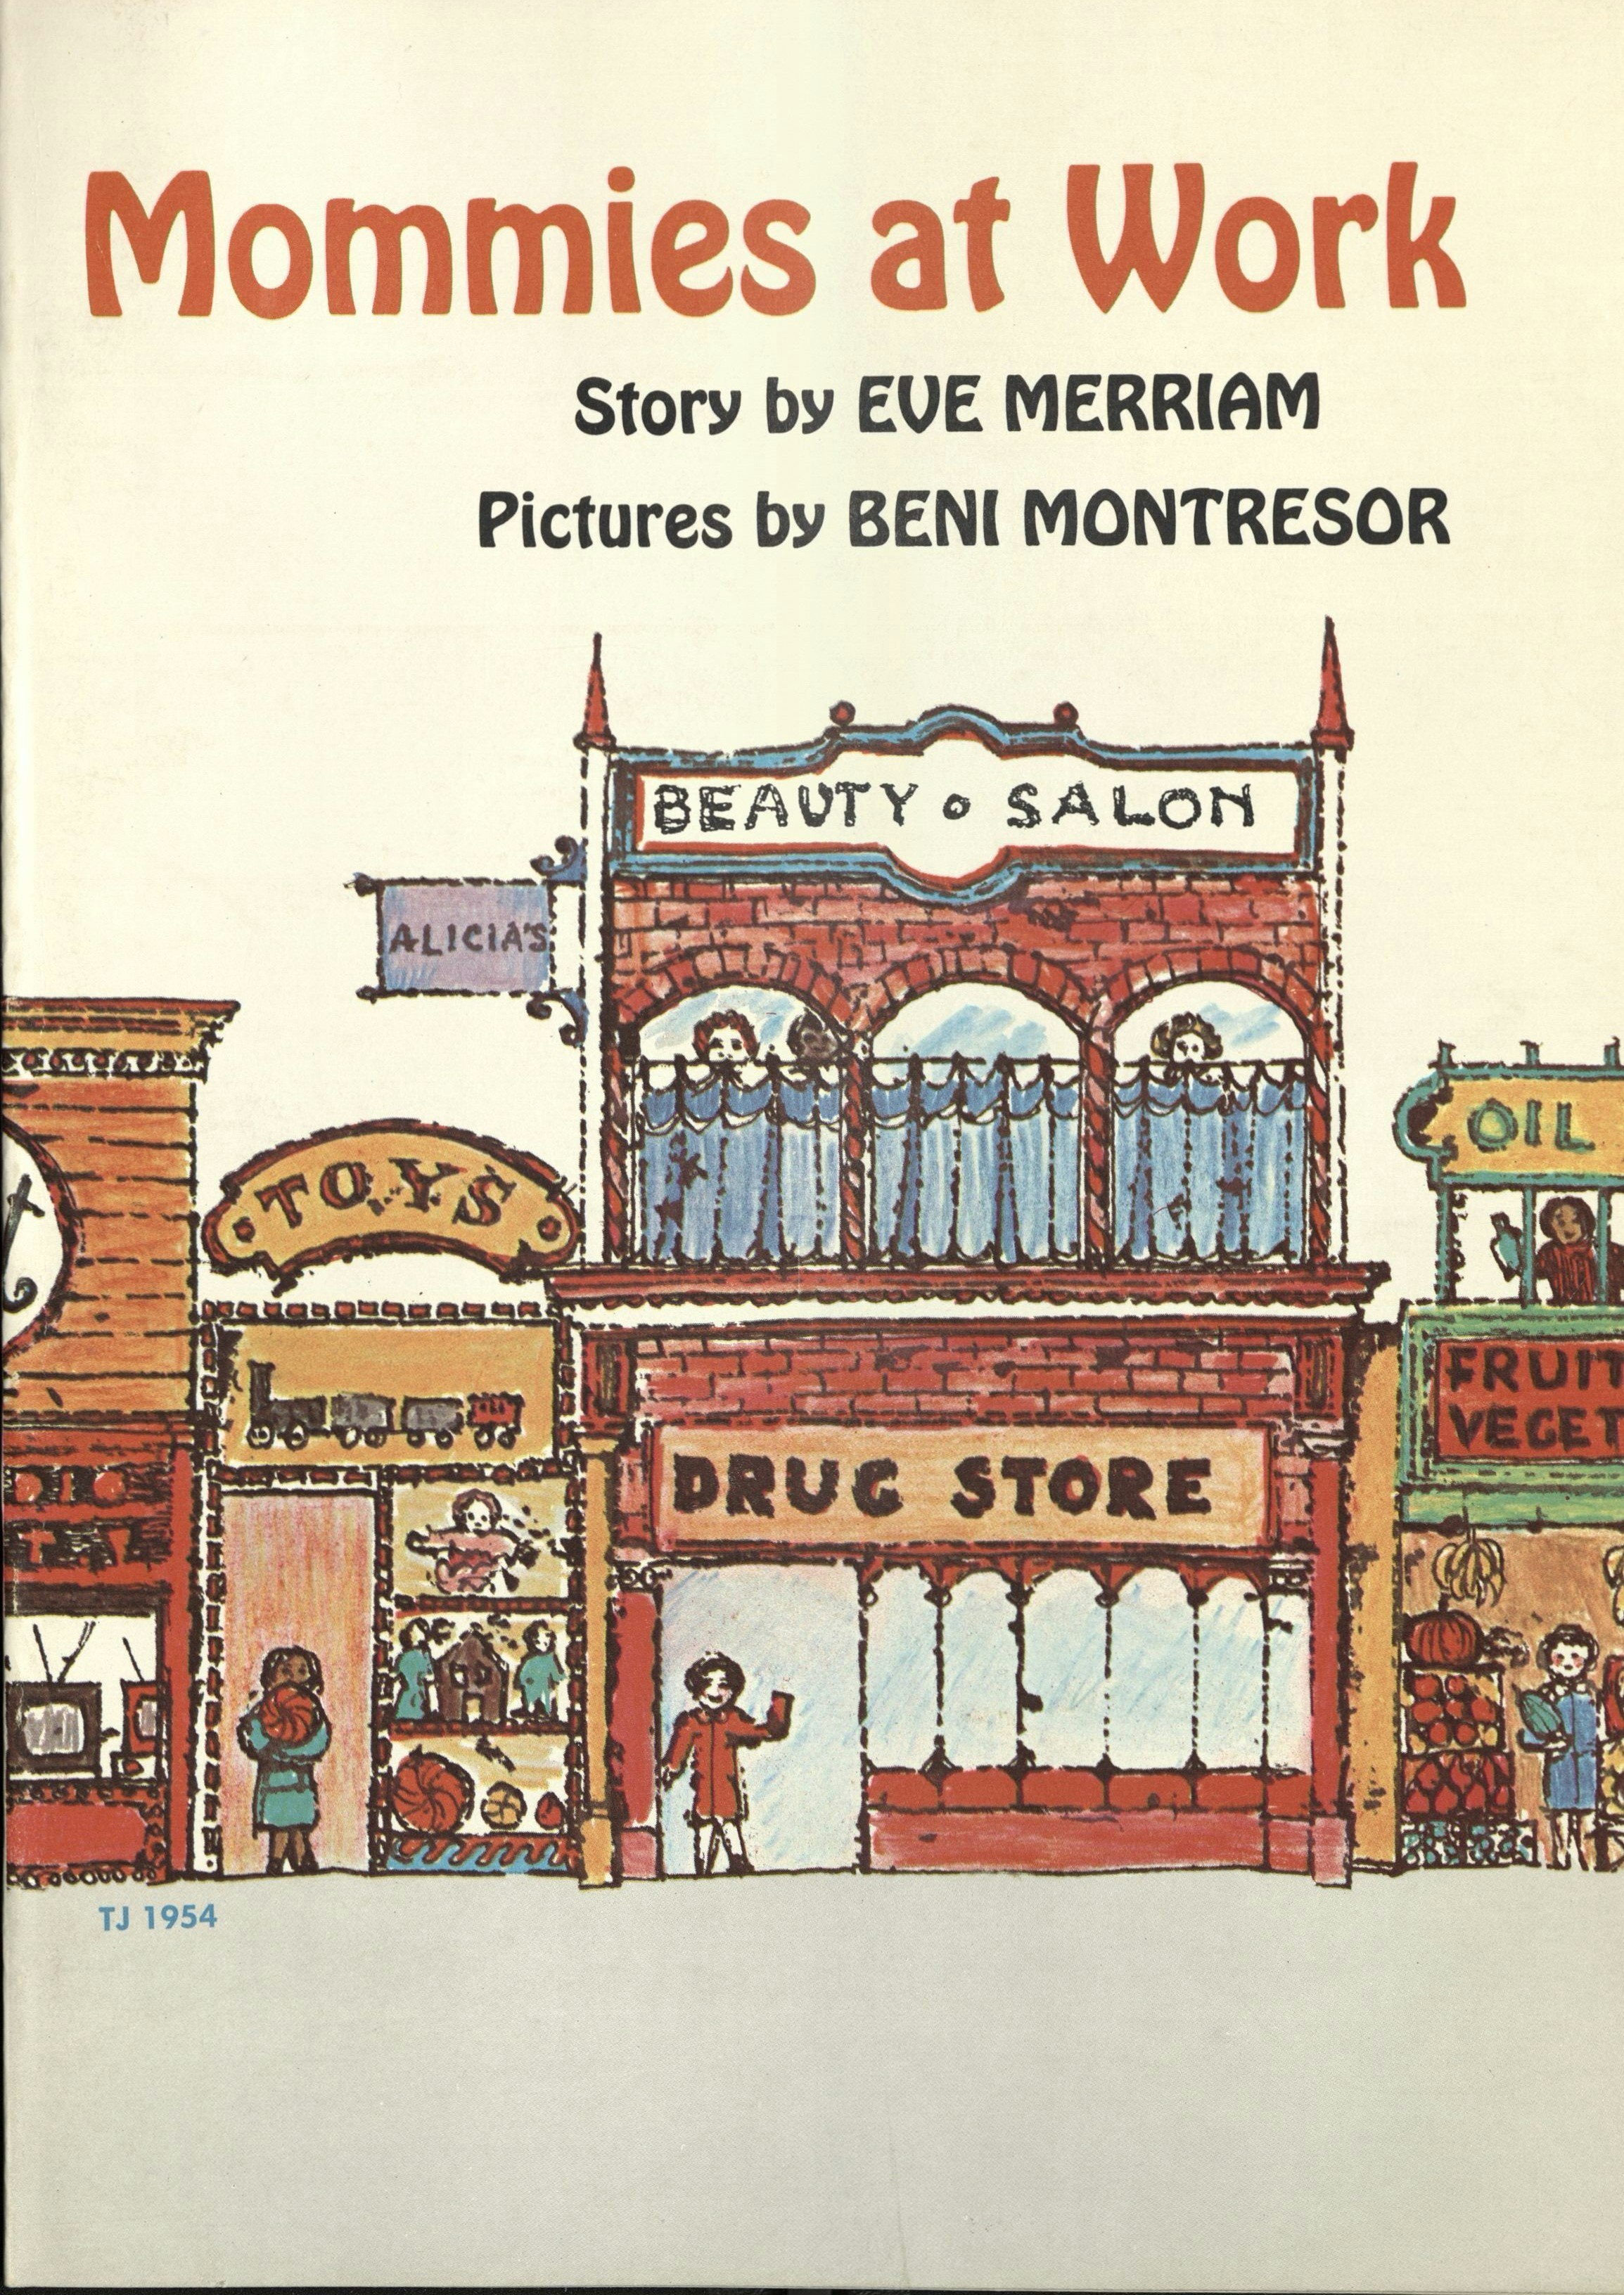 Book by Eve Merriam